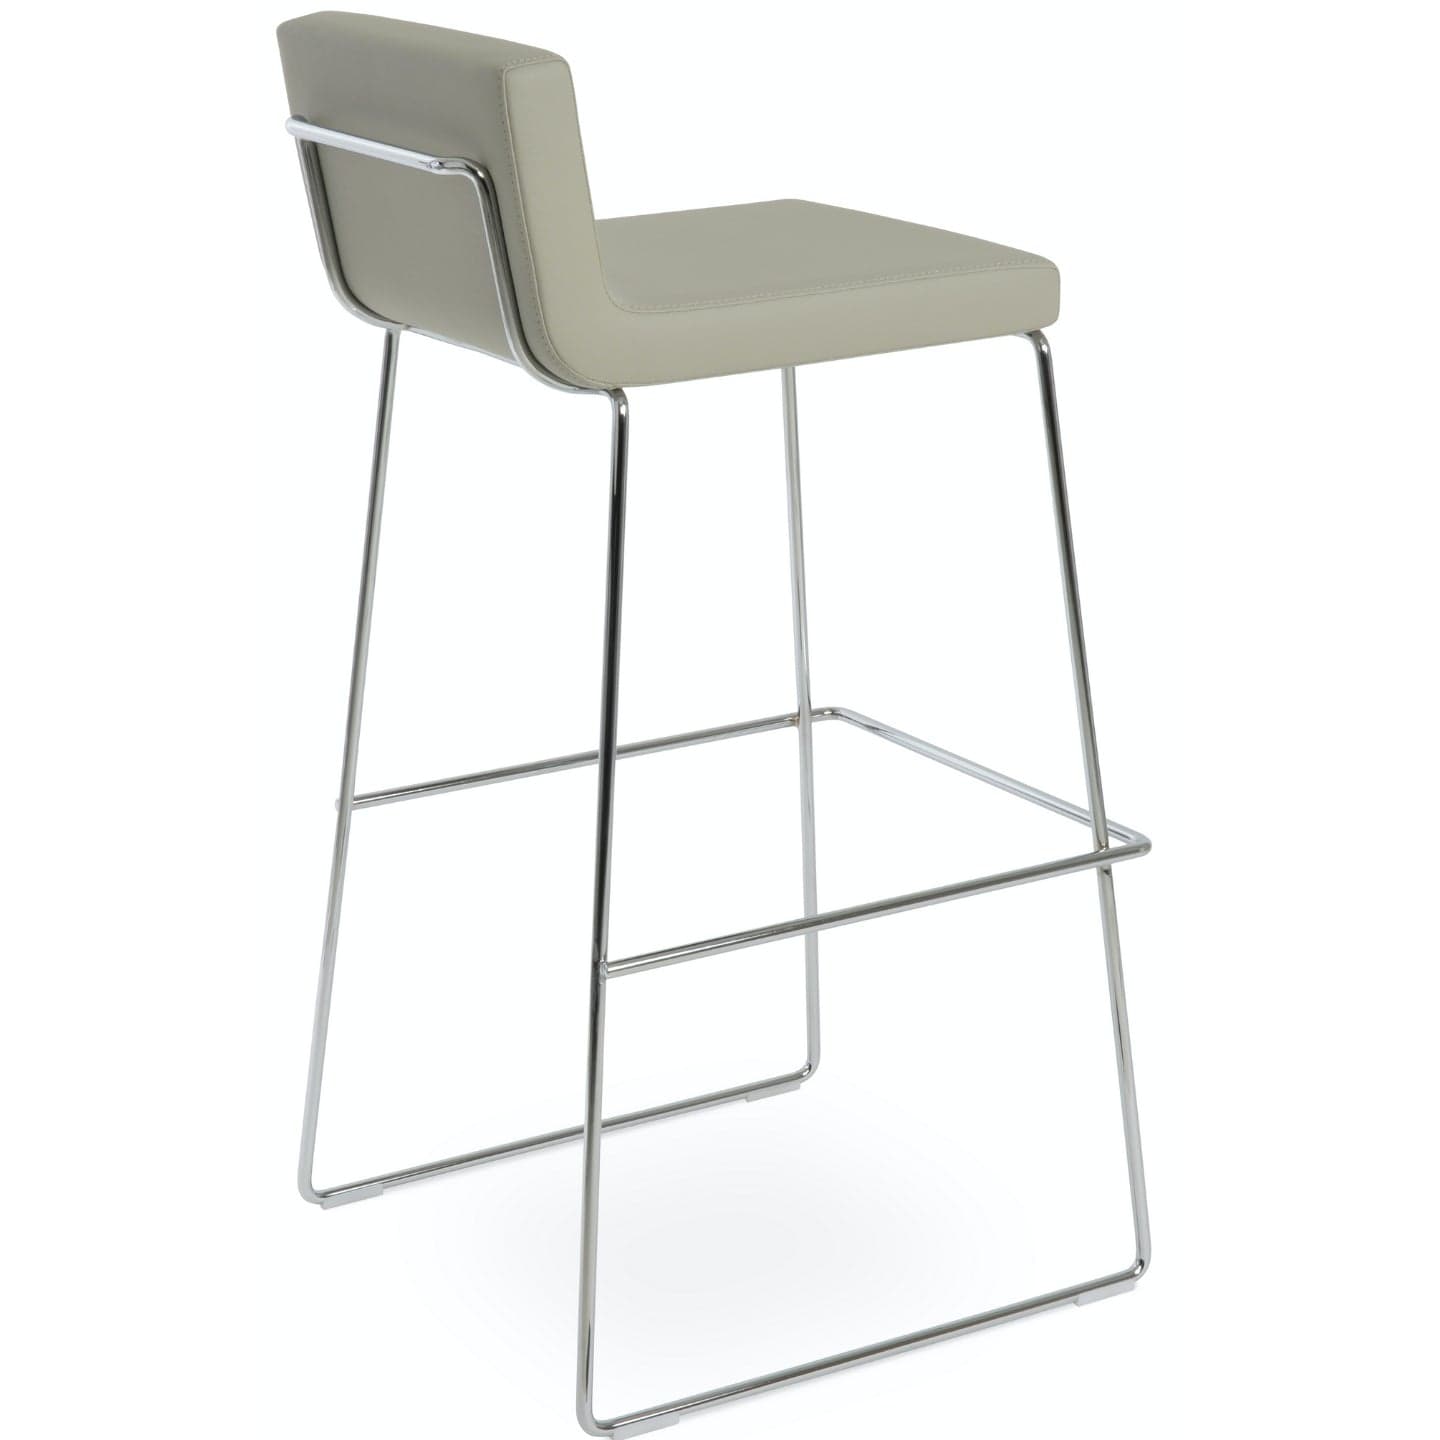 Soho Concept dallas-wire-handle-back-metal-wire-base-leatherette-seat-kitchen-stool-in-light-grey